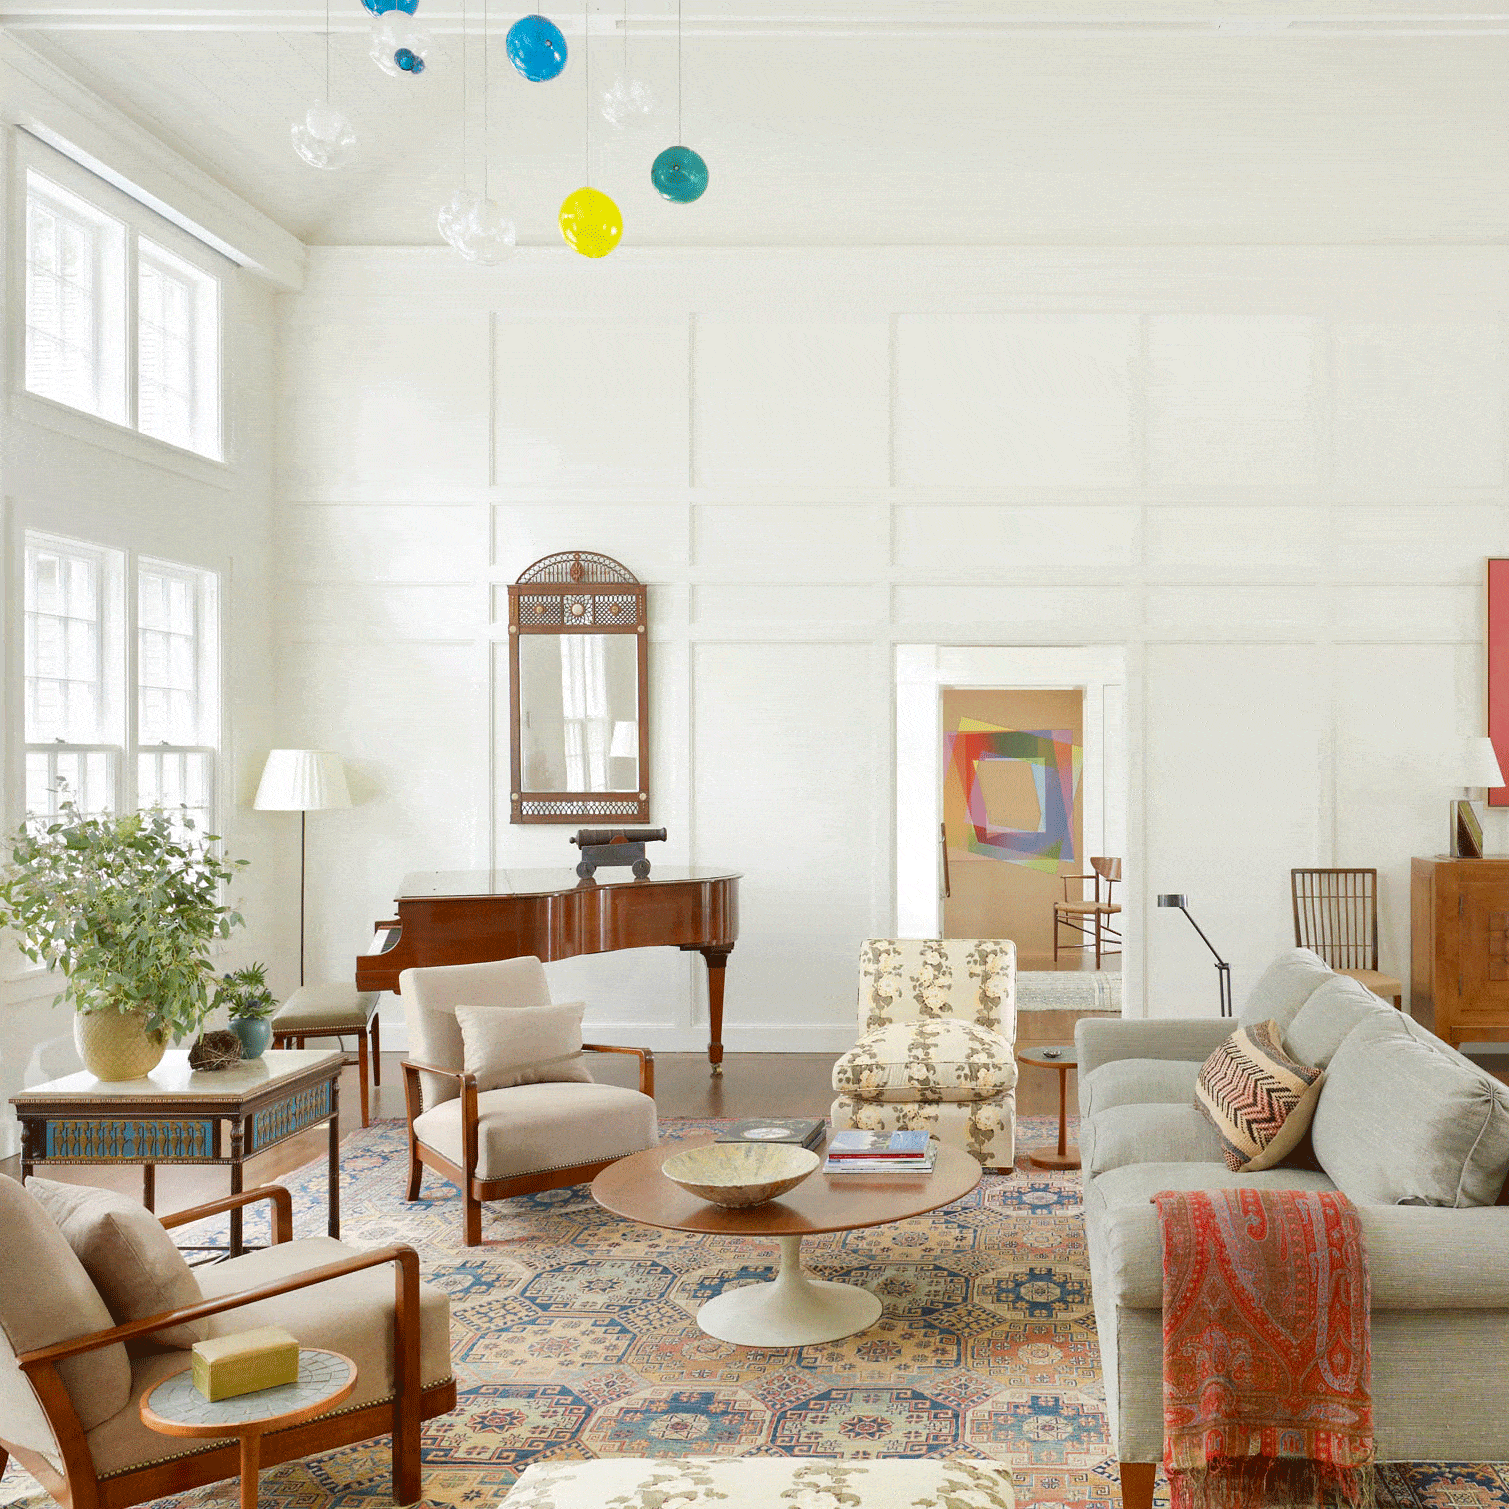 This living room on Long land, with a high beamed ceiling supported by regularly paneled walls, is a modern interpretation of the classical tradition.